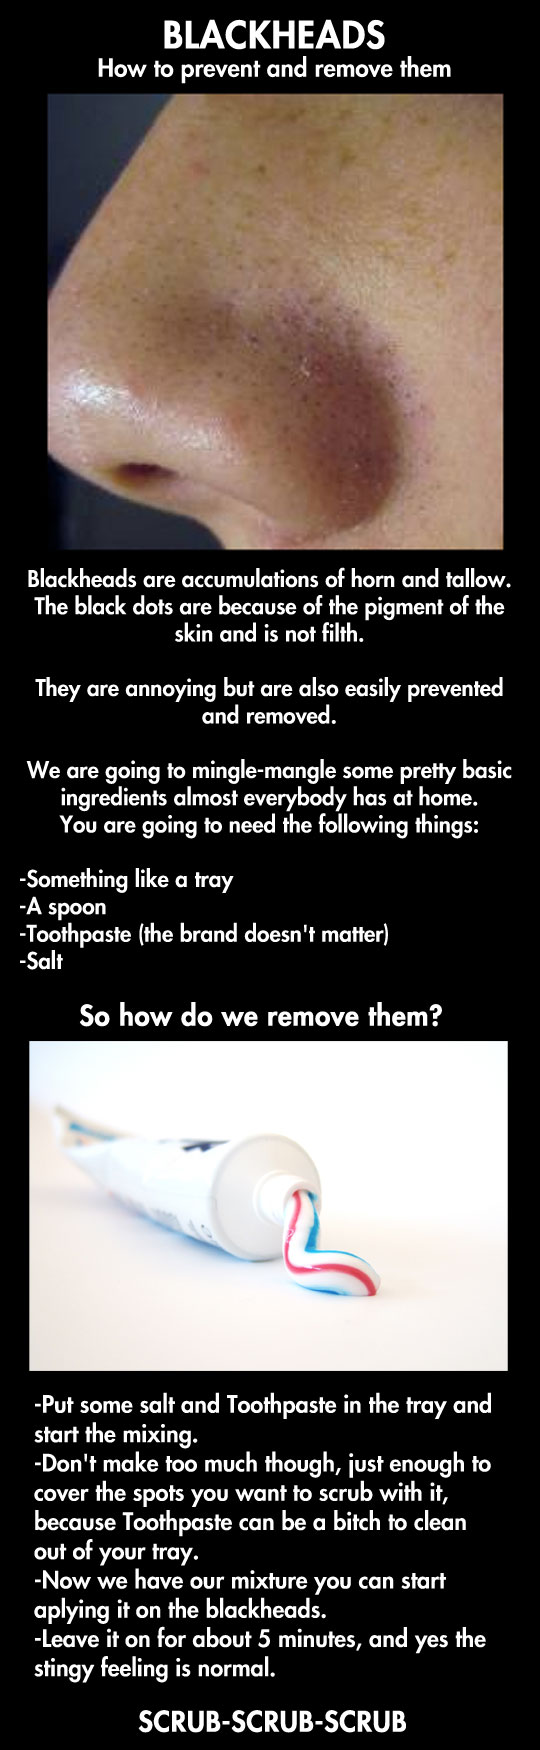 Dealing with blackheads.